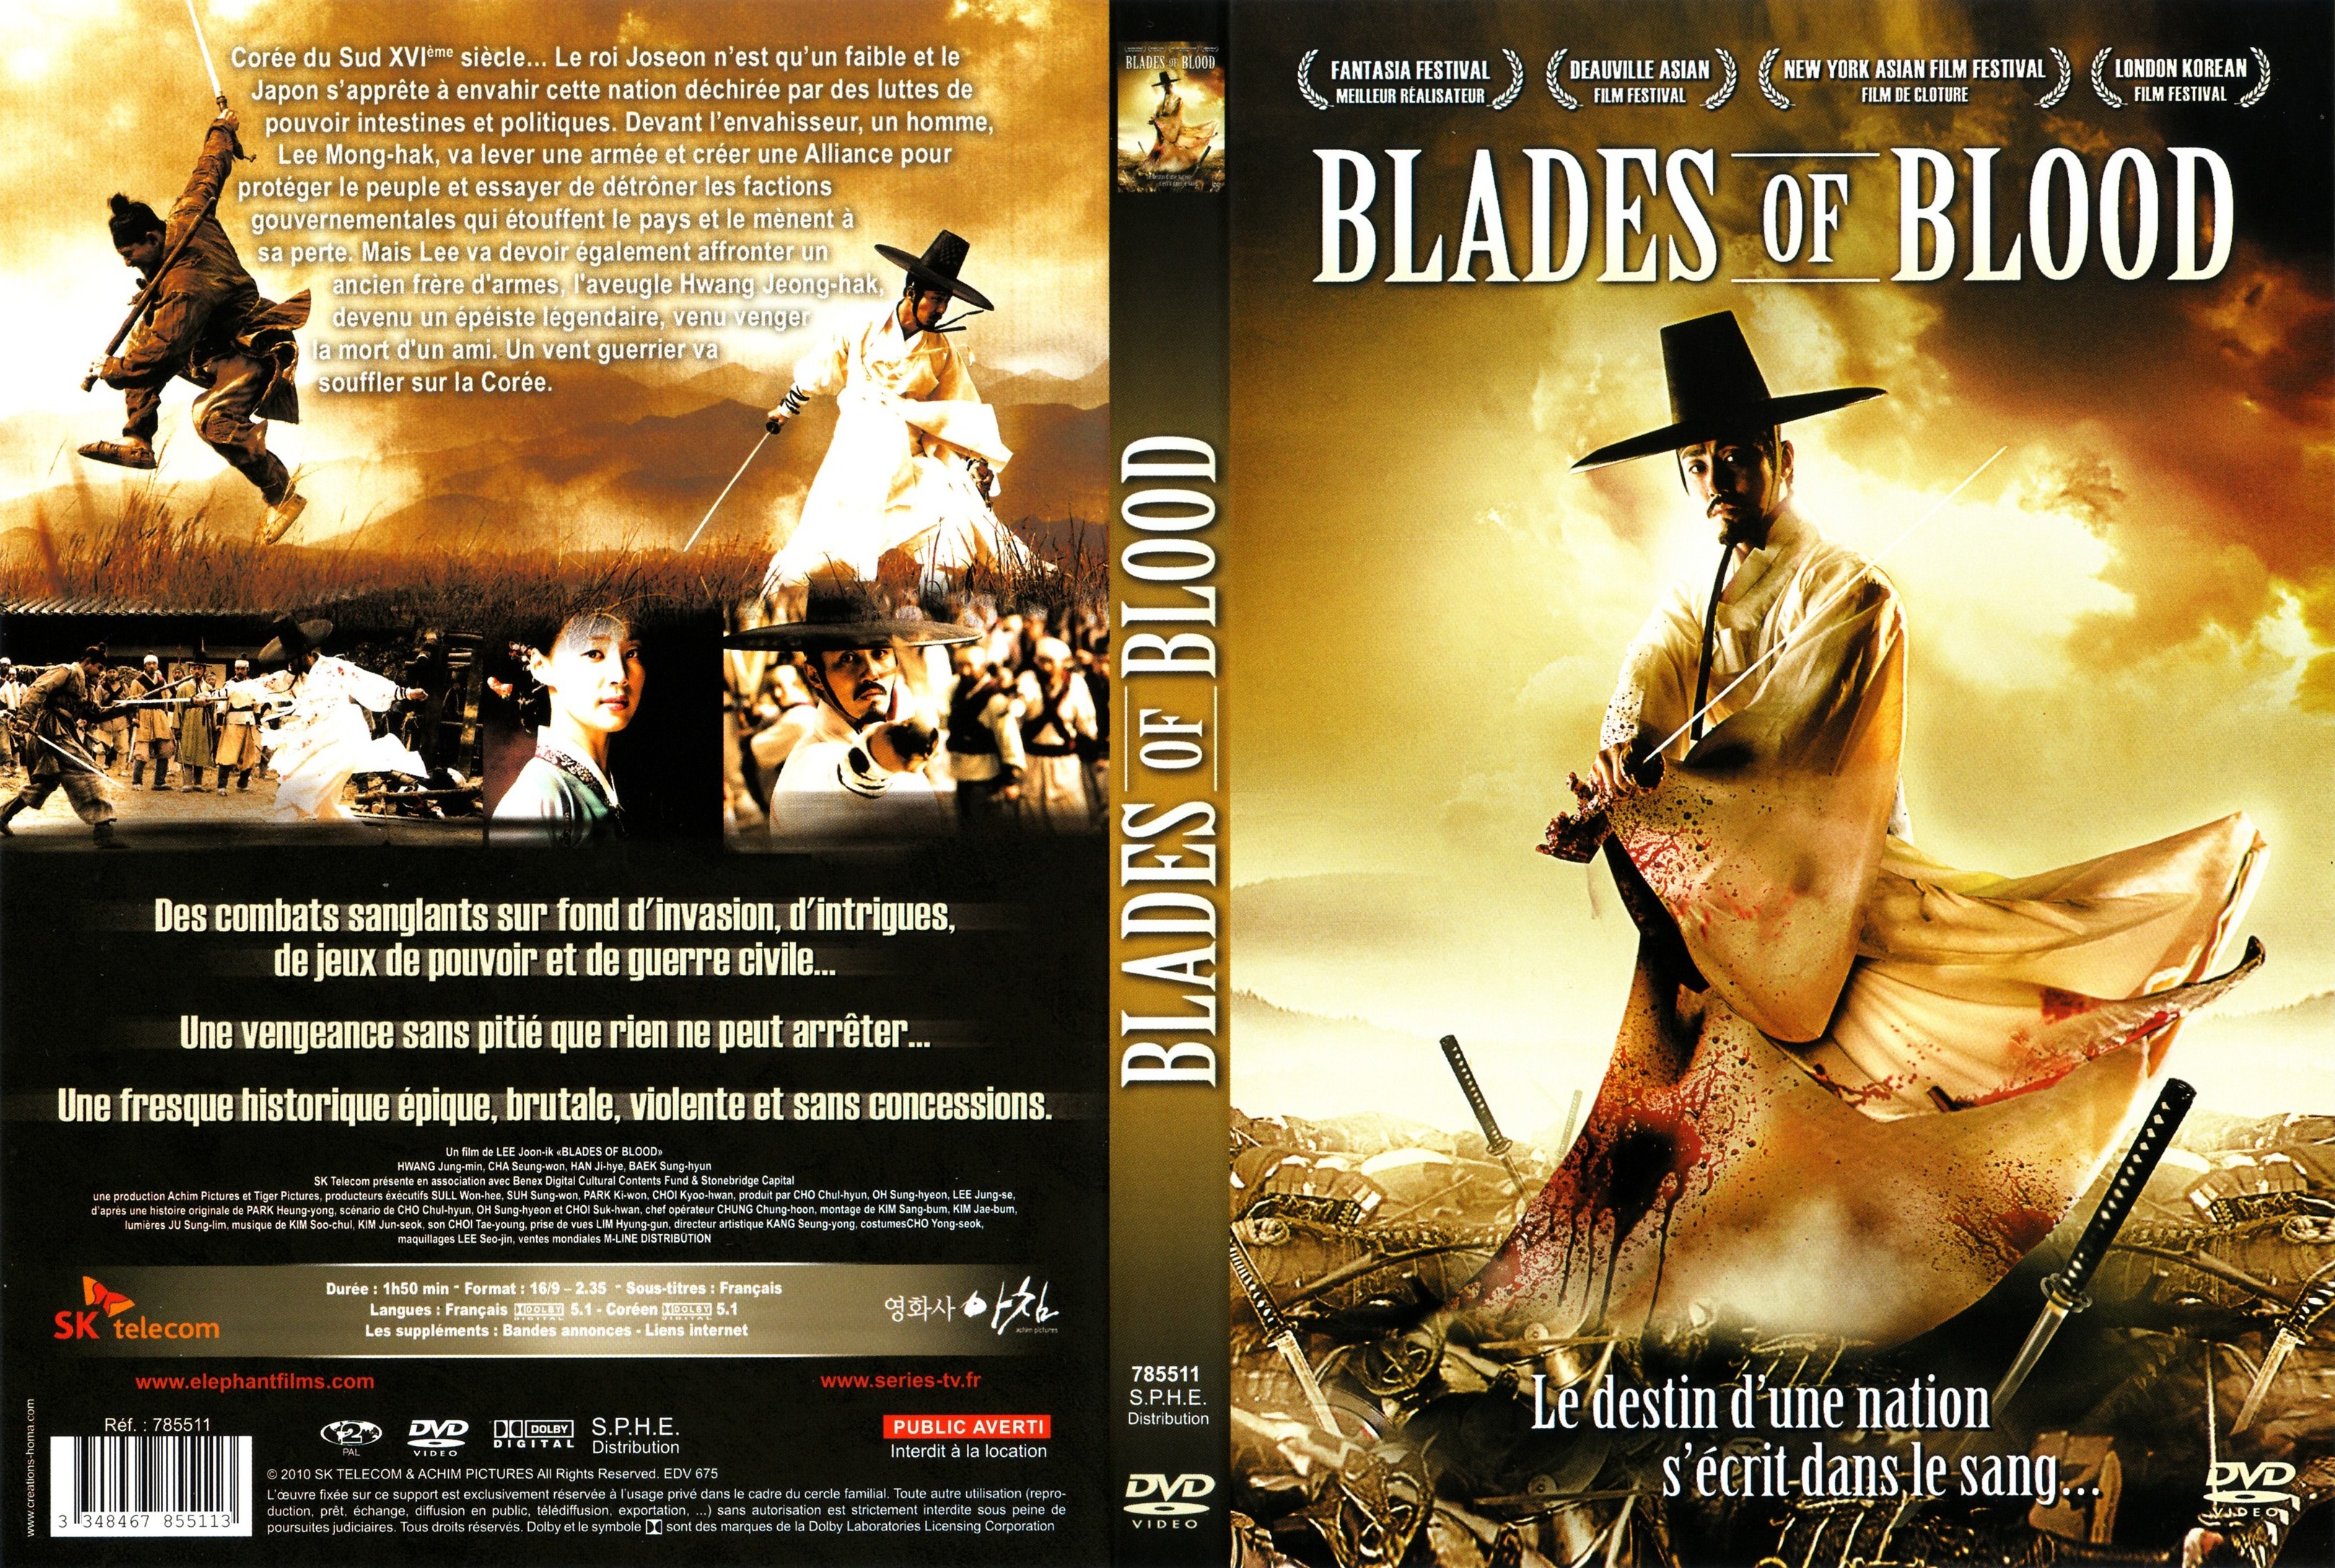 Jaquette DVD Blades of blood